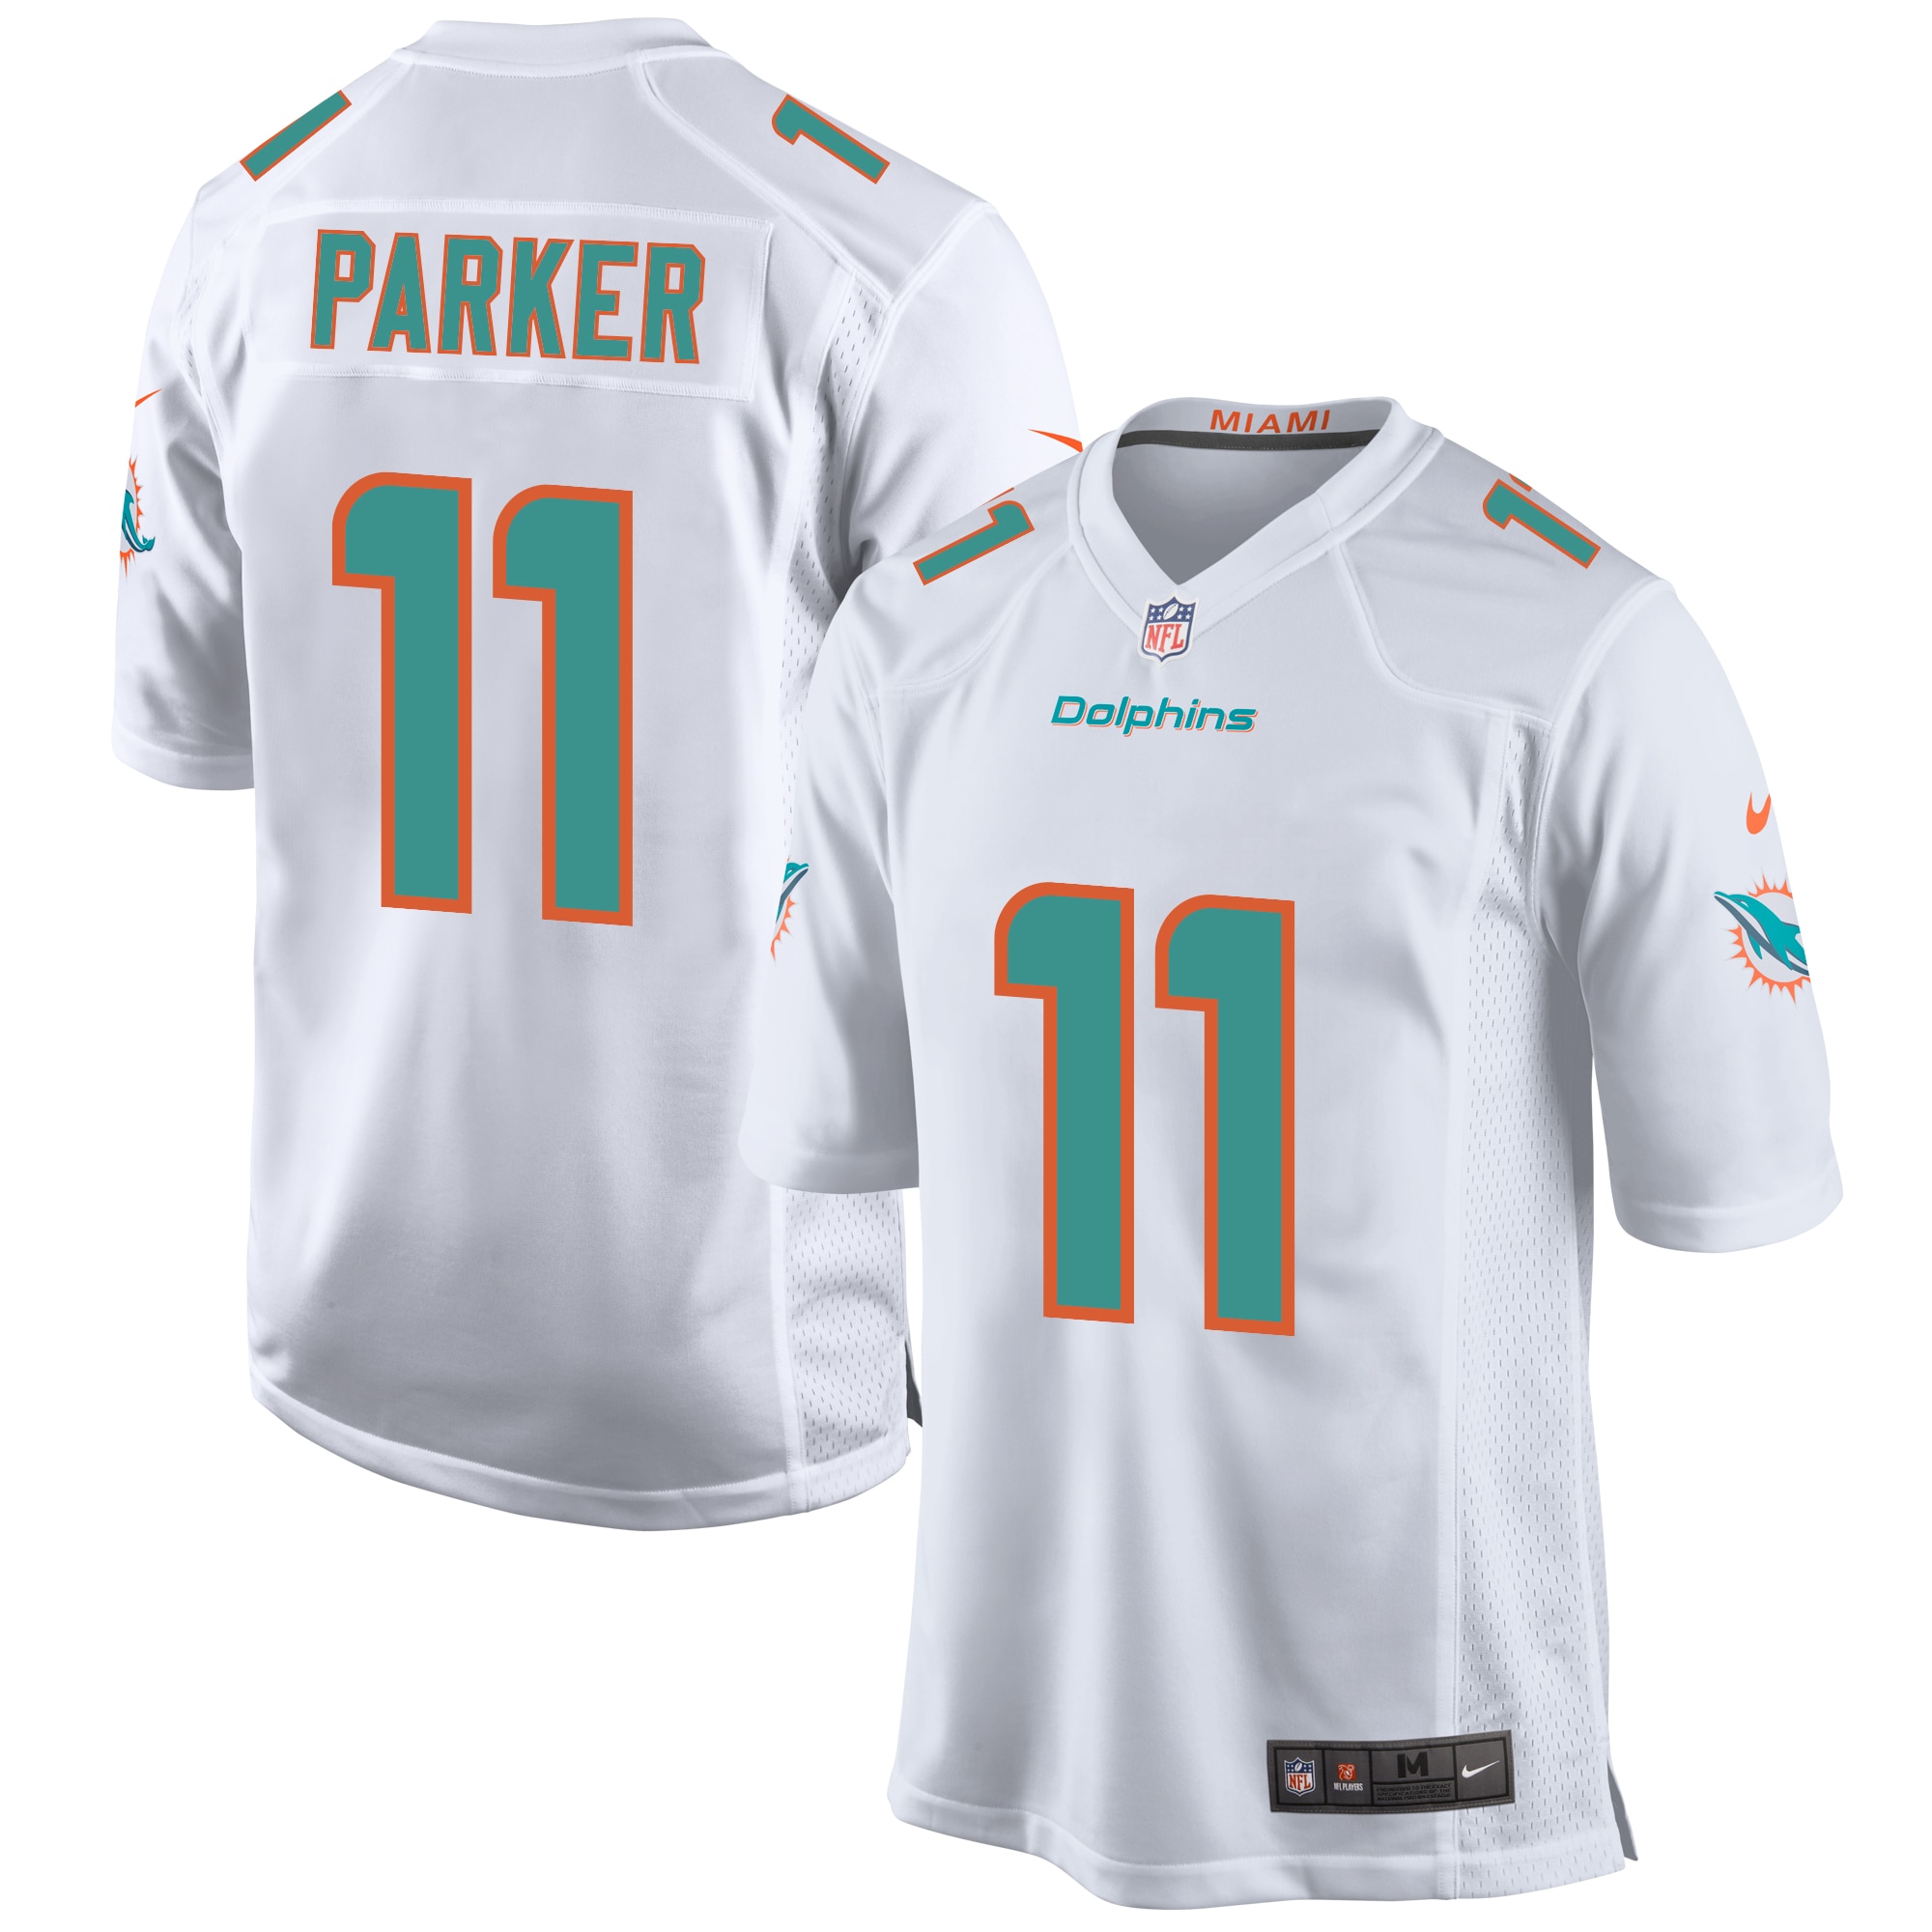 Miami Dolphins Road Game Jersey 